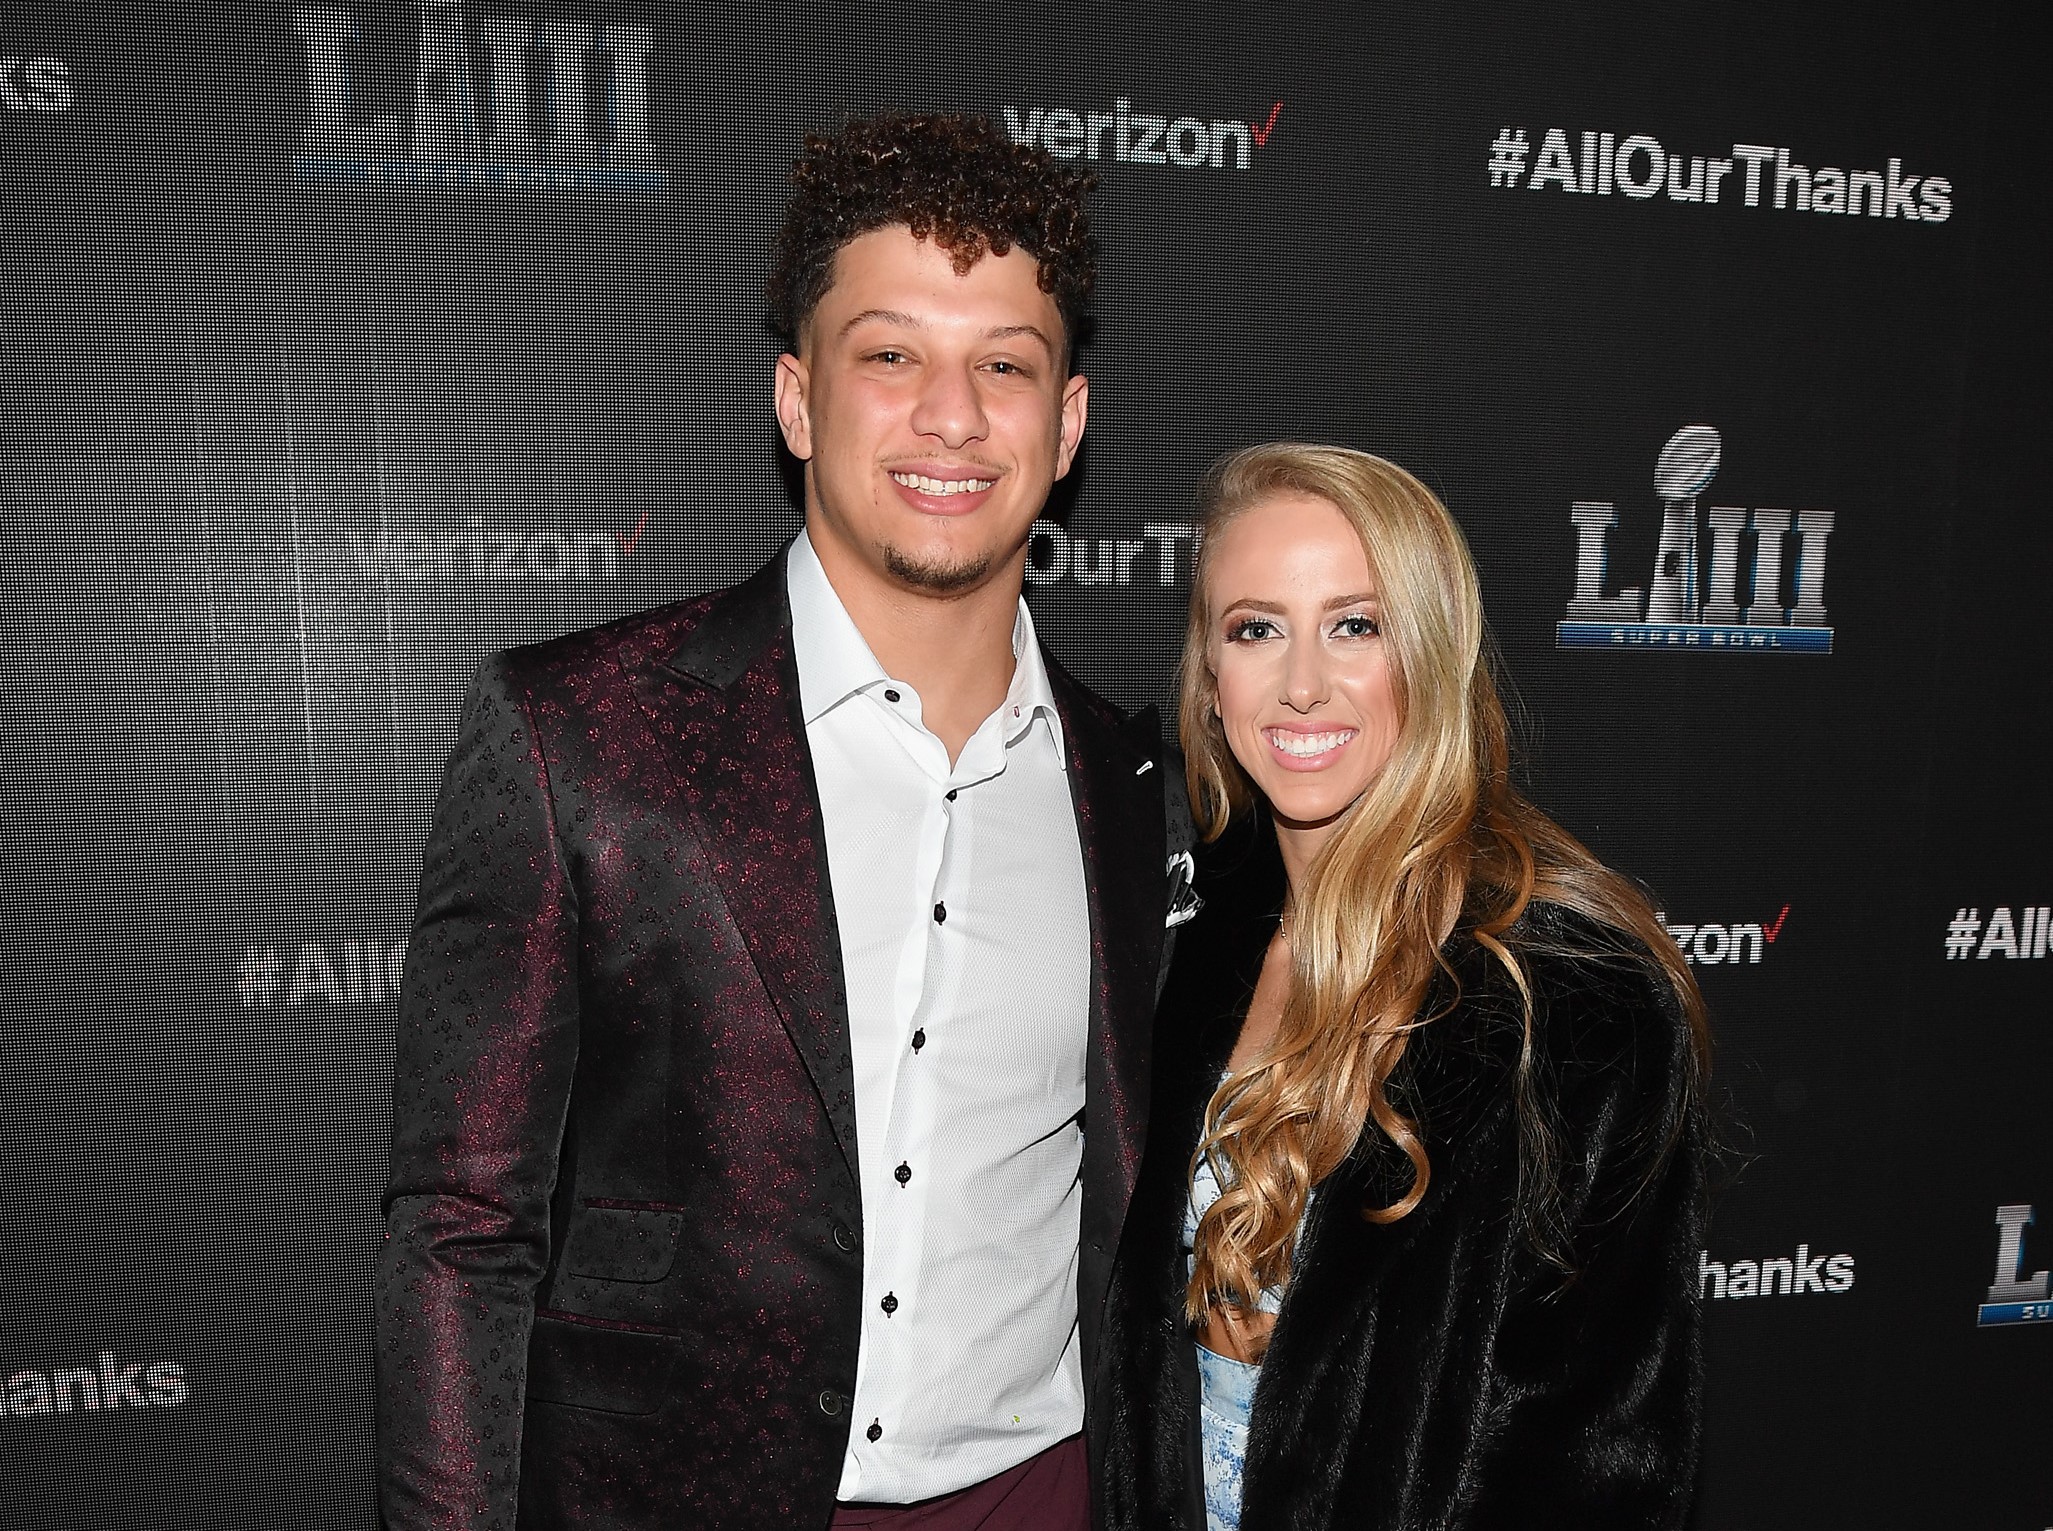 Patrick Mahomes Shares How He and Fiancée Brittany Matthews Are Celebrating New Year’s Eve